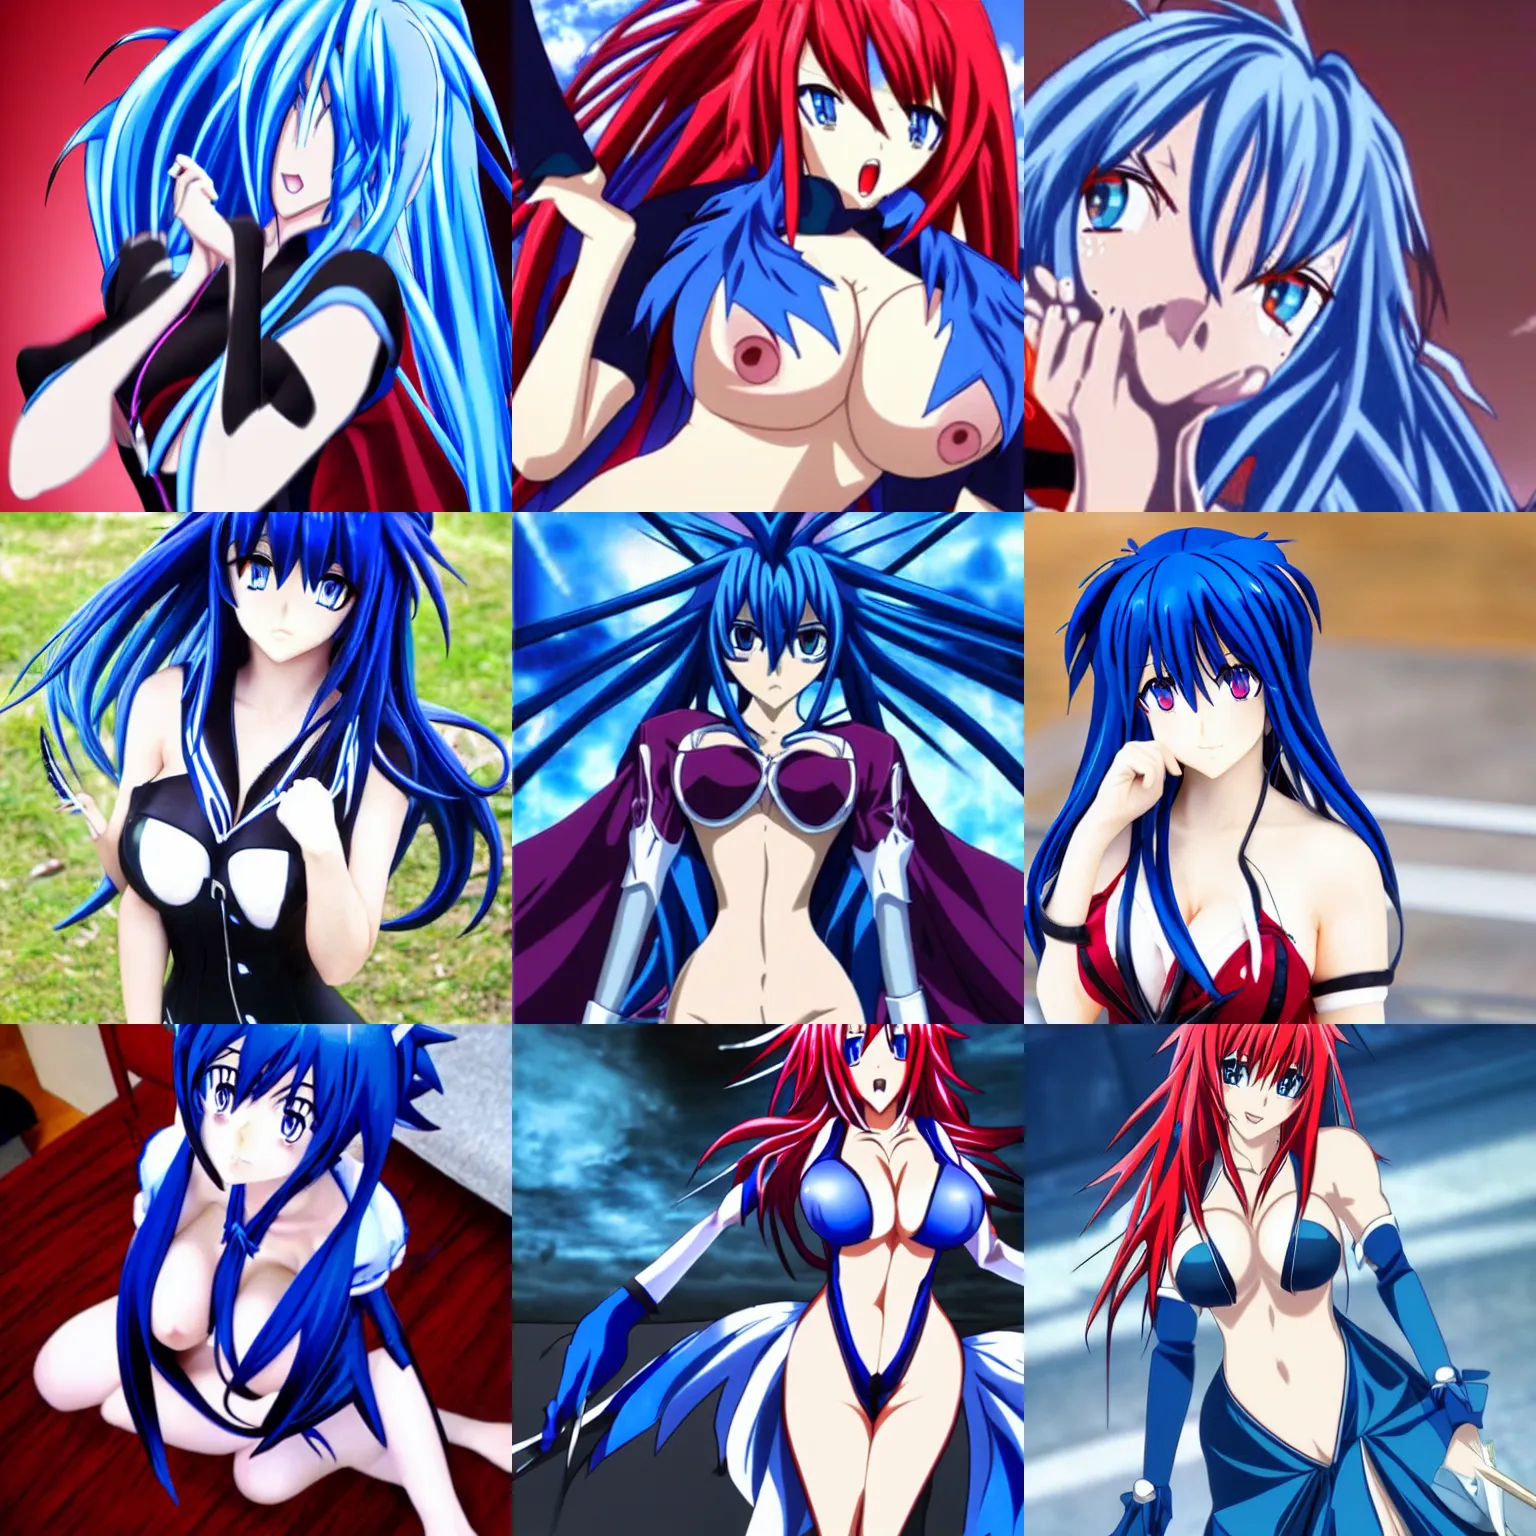 Prompt: Rias Gremory from Highschool DxD but with blue hair